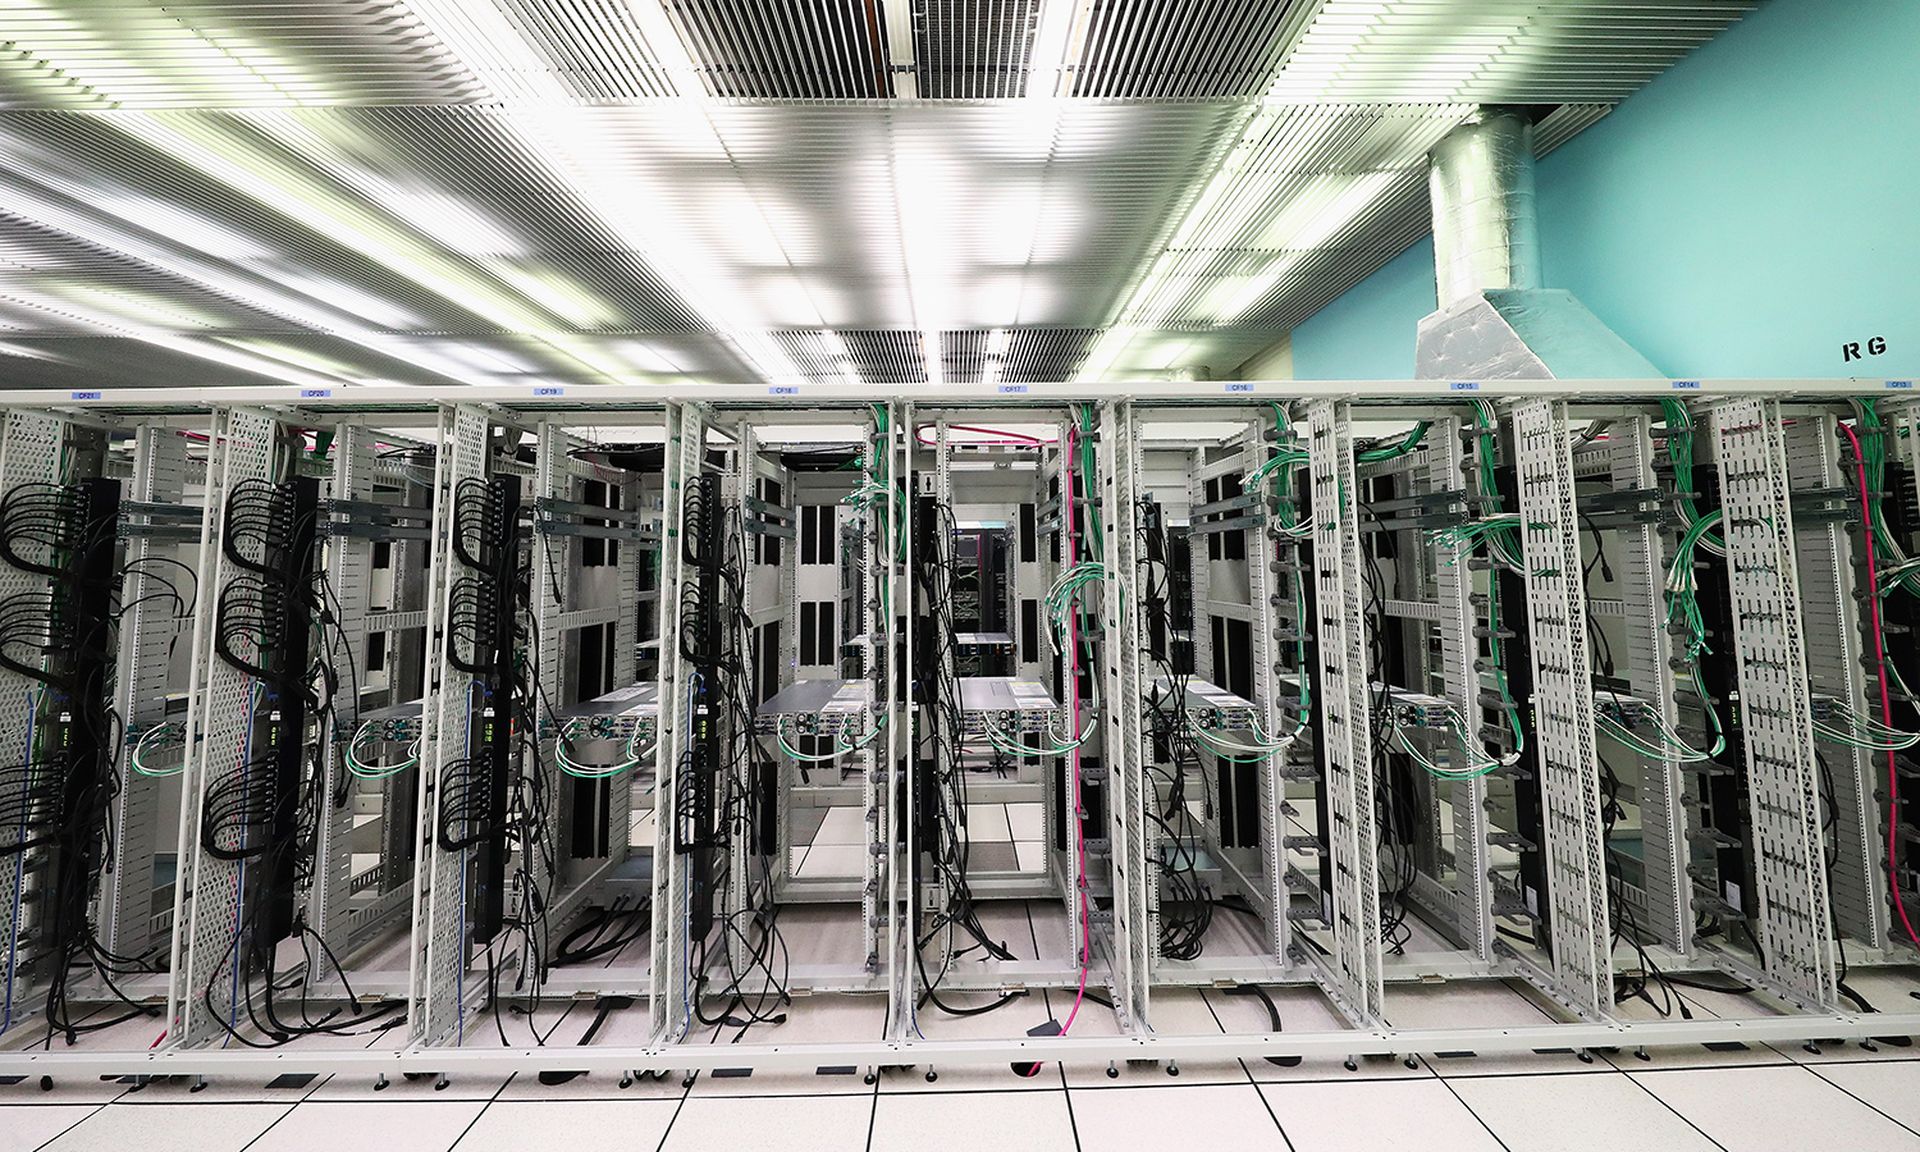 A general view in the CERN Computer / Data Centre and server farm on April 19, 2017, in Meyrin, Switzerland. (Photo by Dean Mouhtaropoulos/Getty Images)